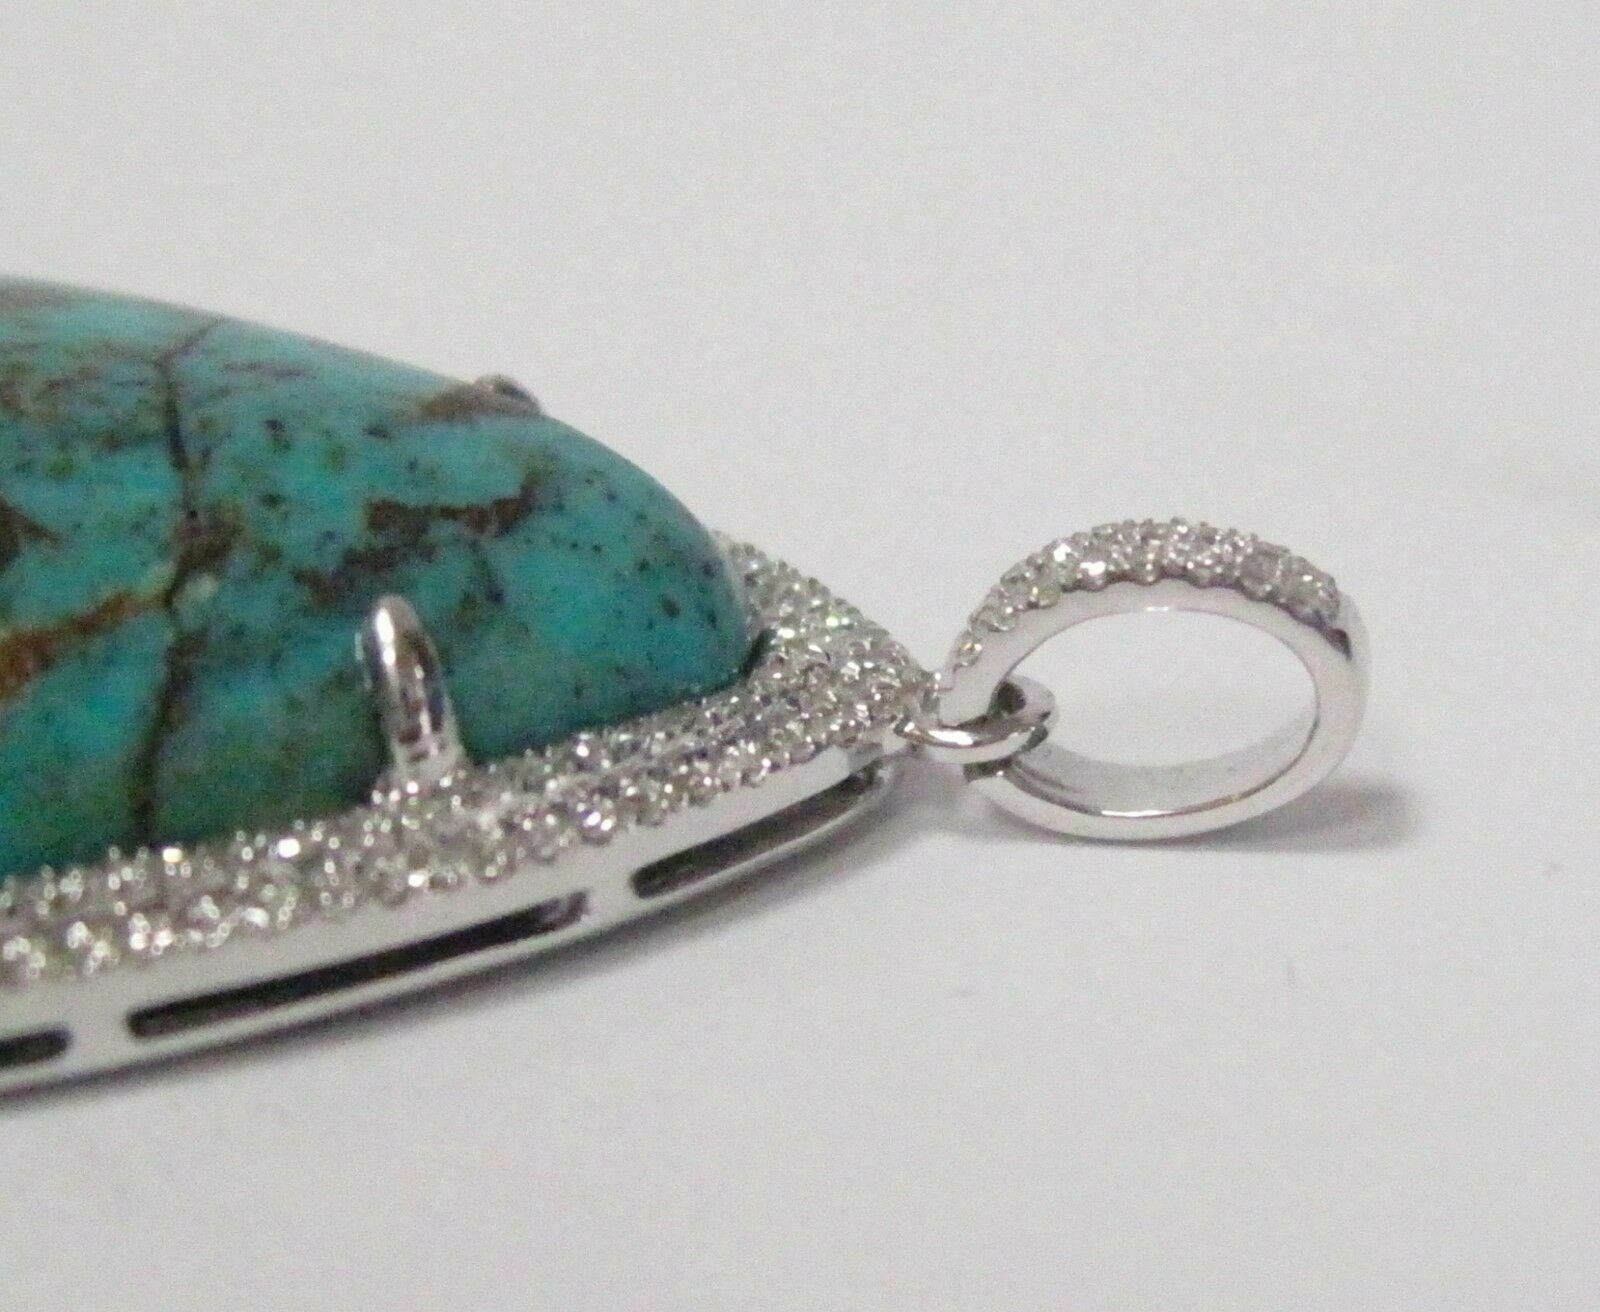 HUGE Pear-Shaped Turquoise with Side Diamonds Pendant 14K White Gold